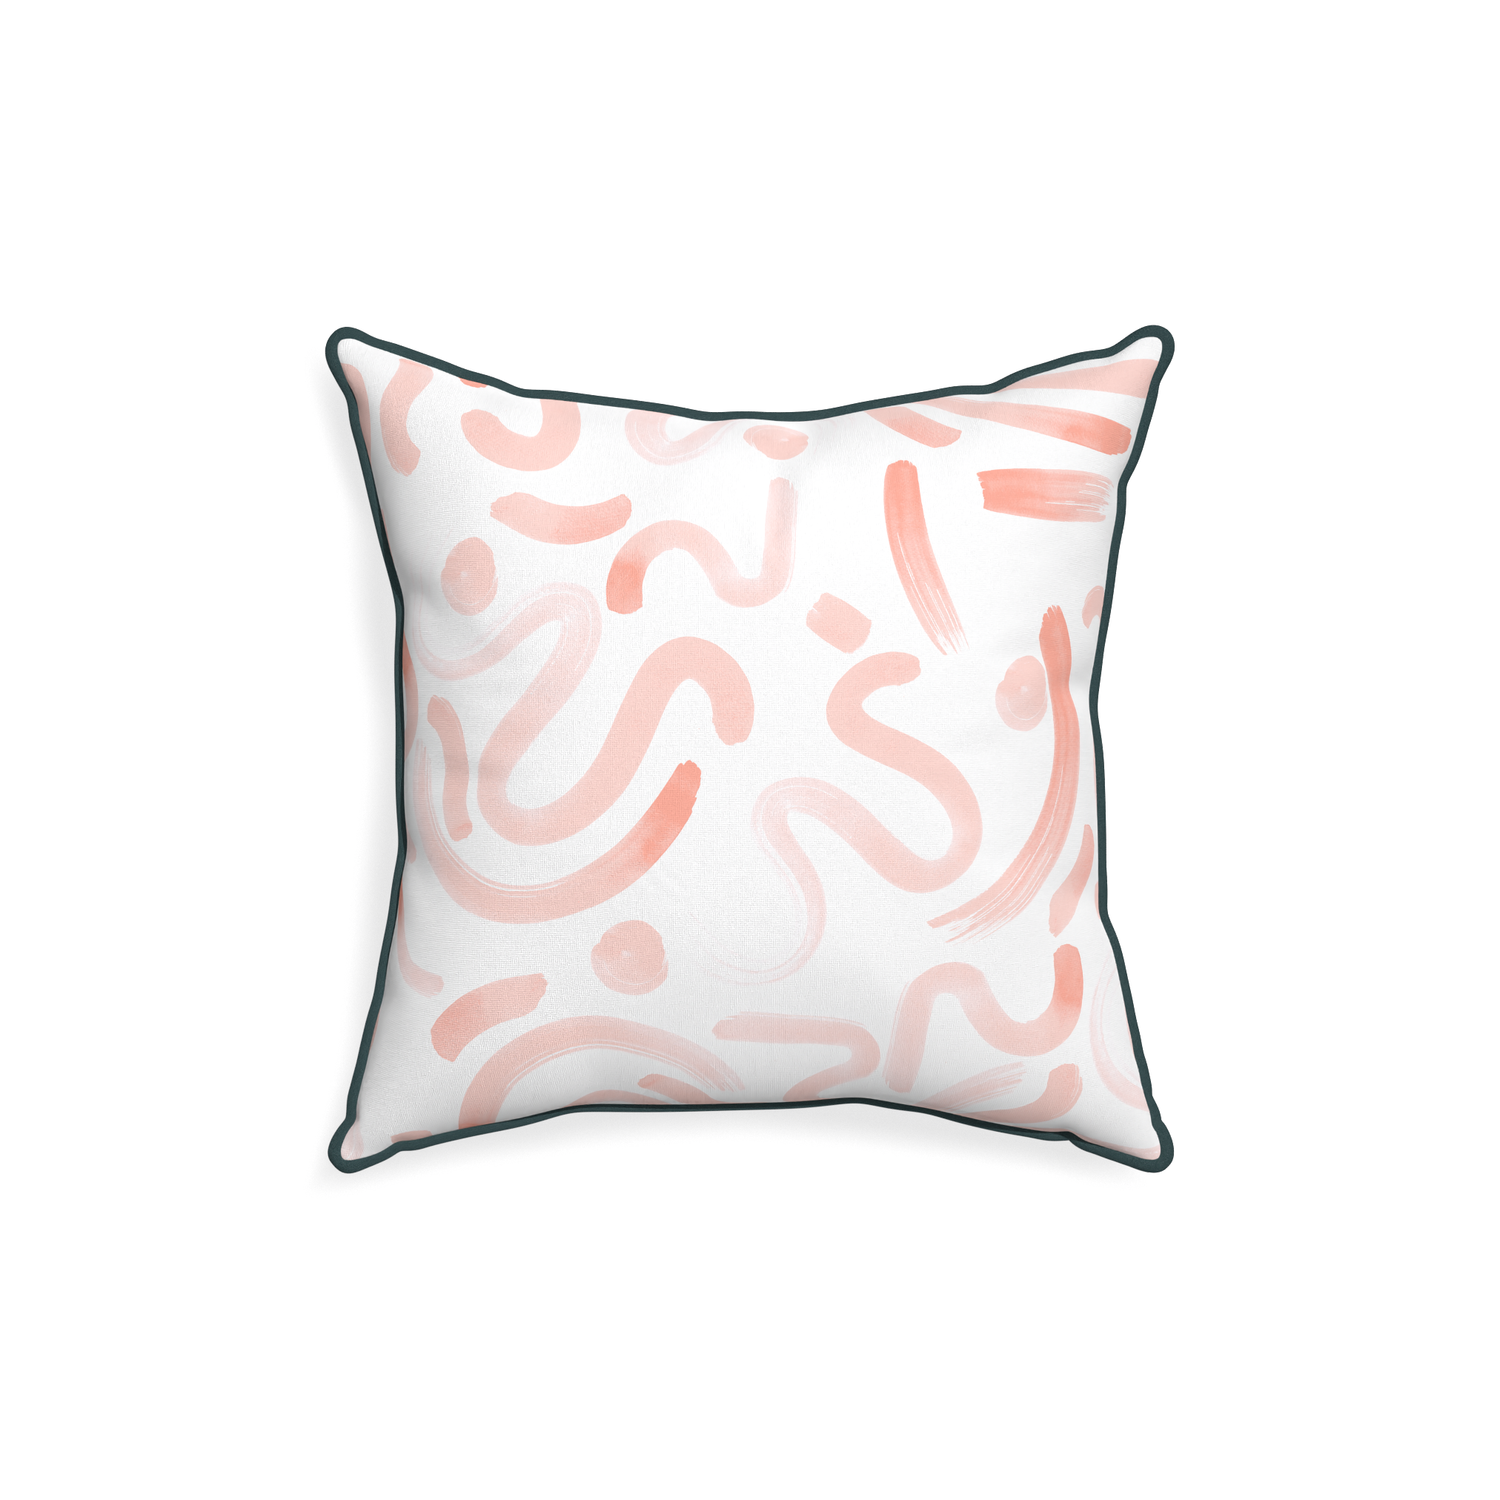 18-square hockney pink custom pink graphicpillow with p piping on white background